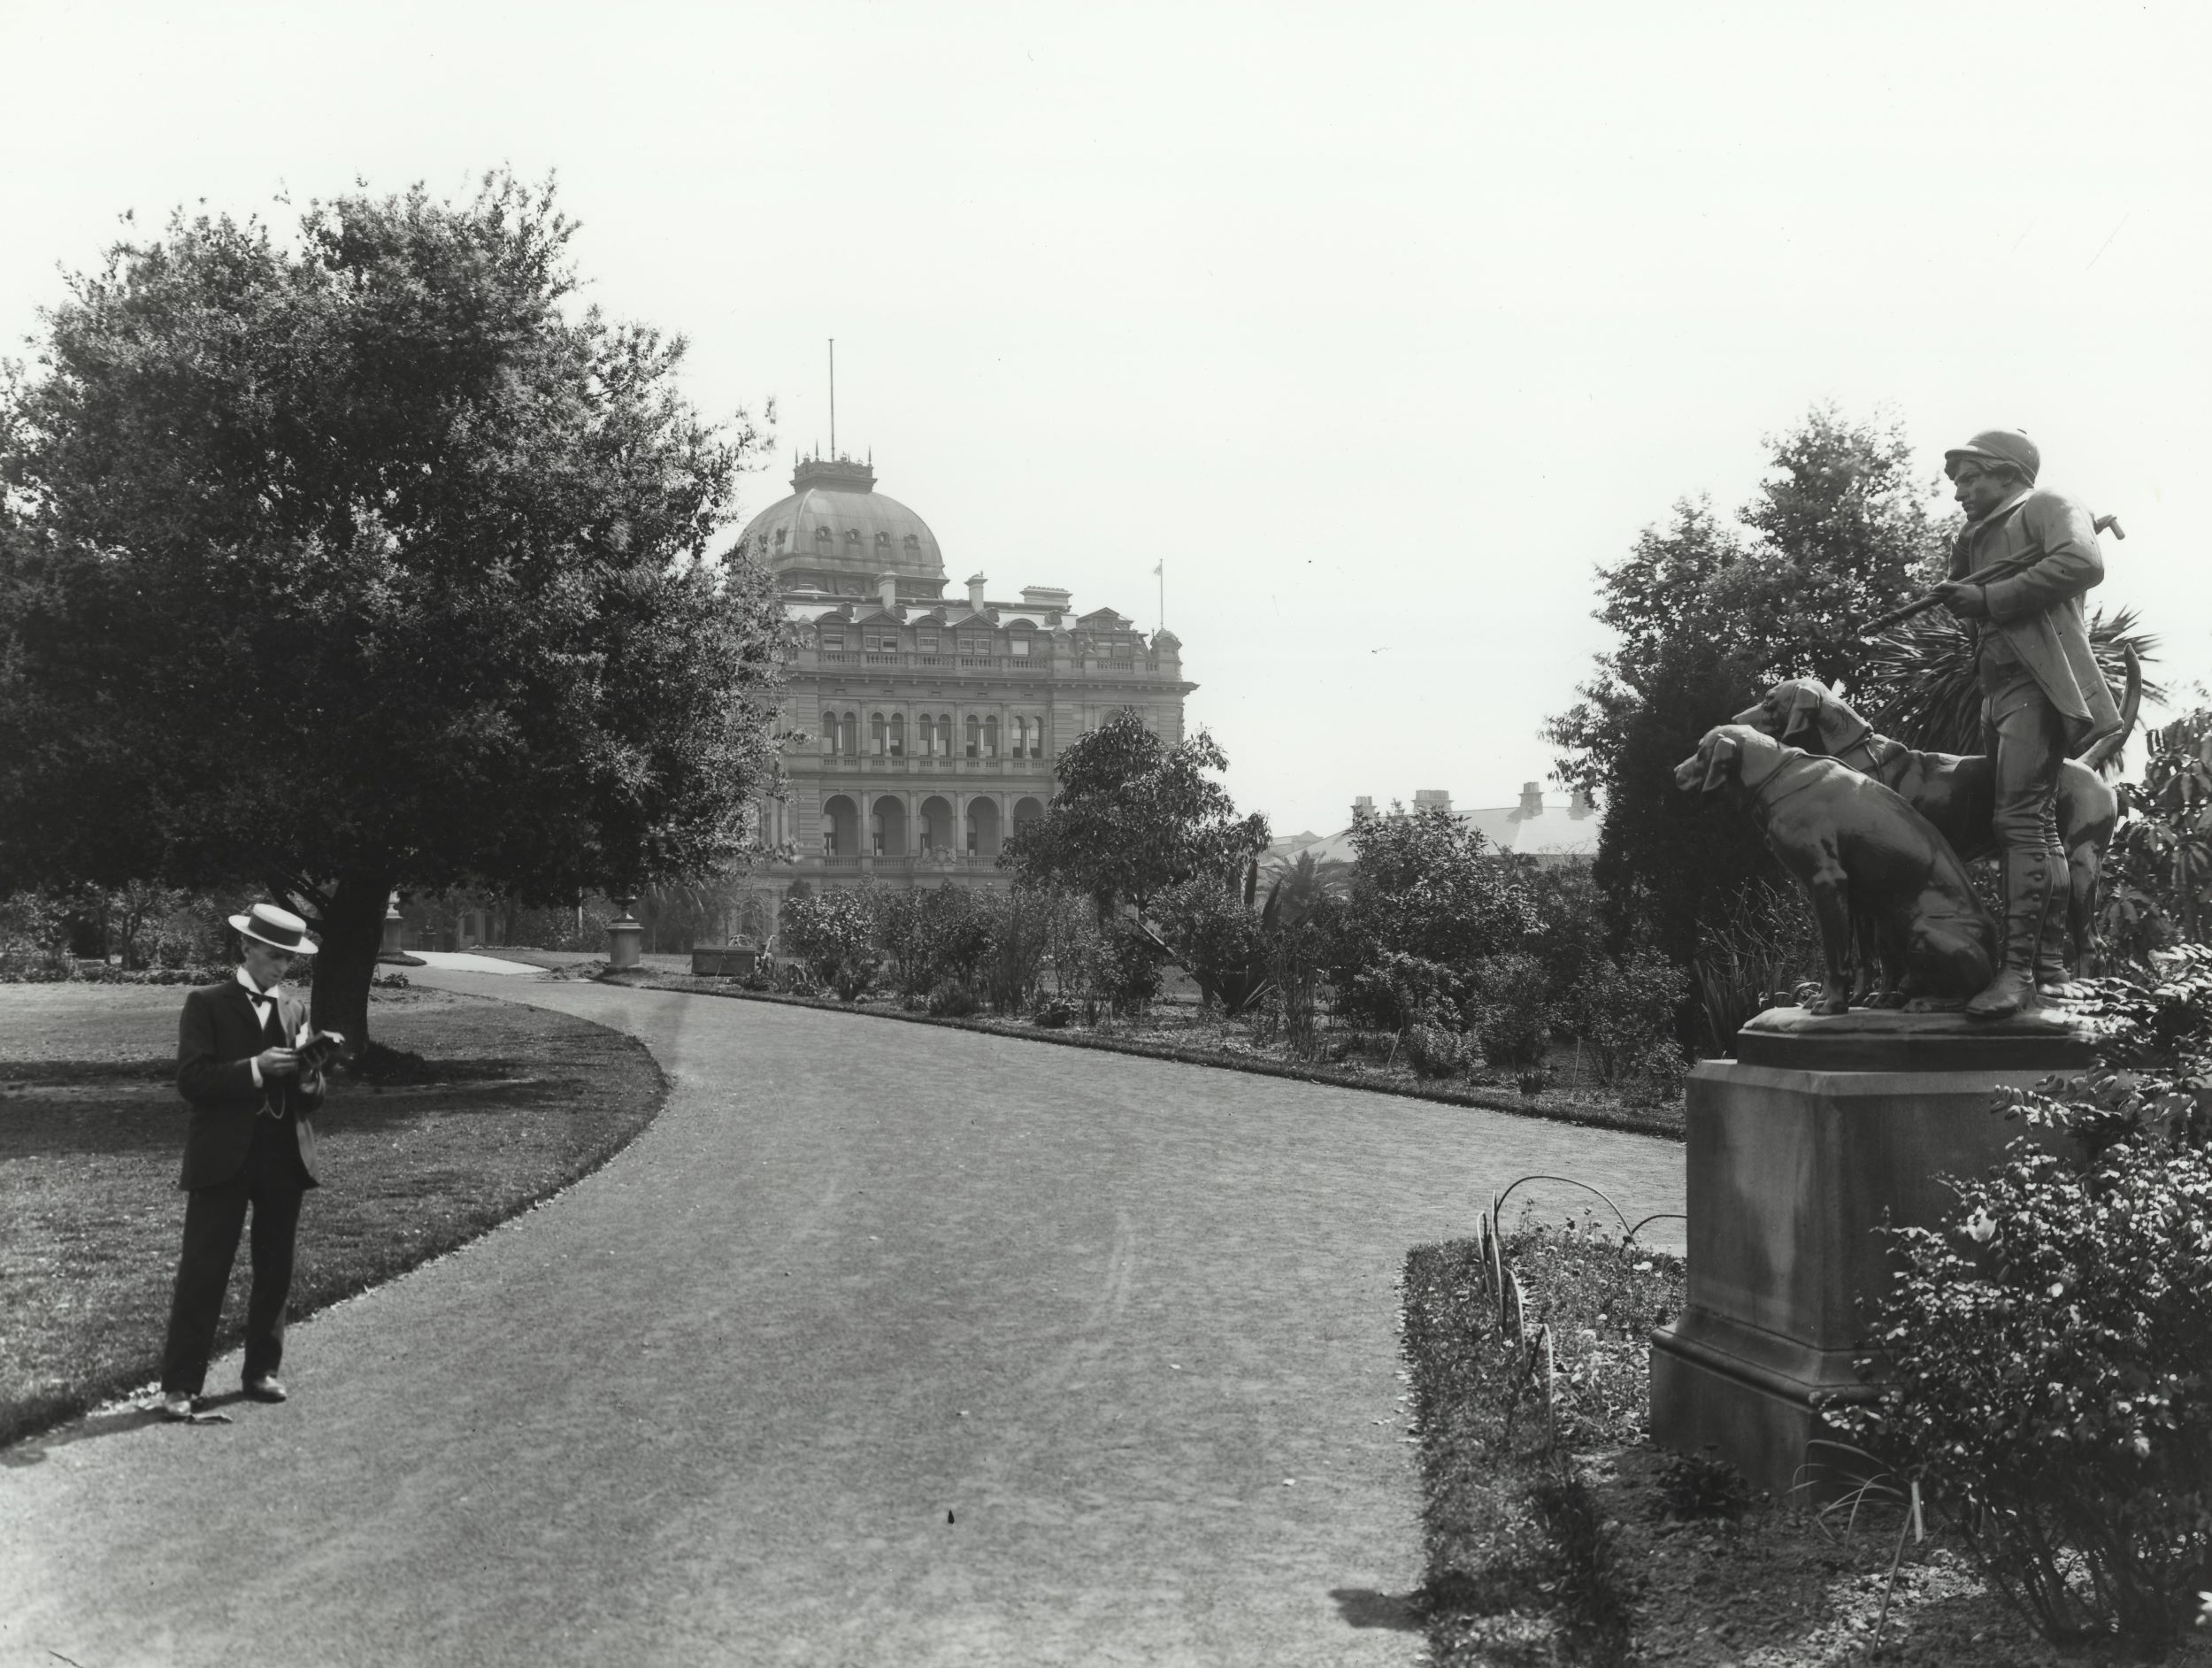 A man in a suit and boater hat stands at the side of the road that to the Colonial Secretary's building